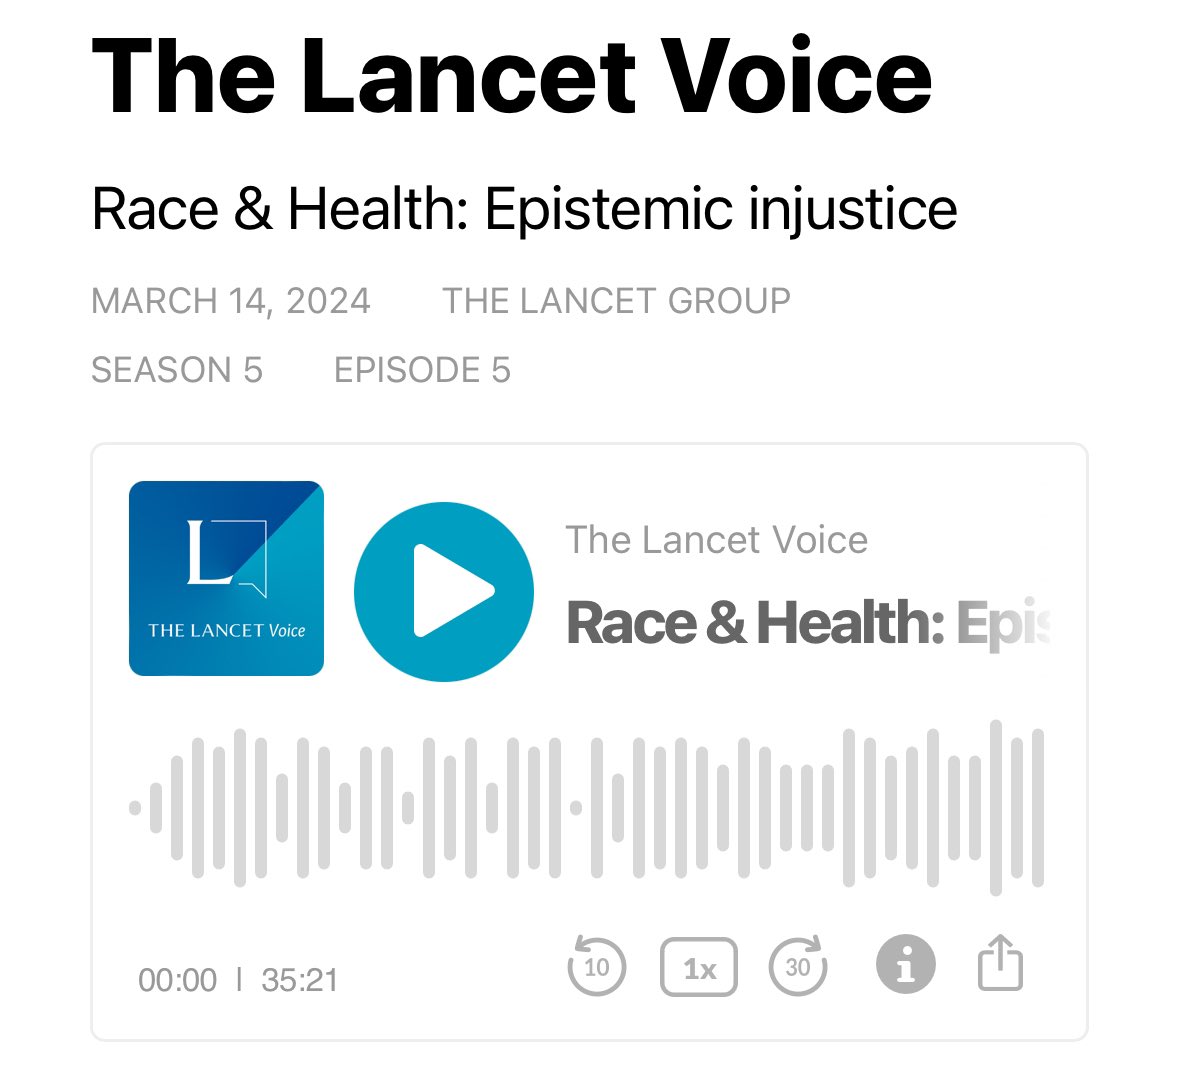 An honour to be on this @raceandhealth x @TheLancet Voice collaboration podcast with @NaiduThirusha @seyeabimbola & @DJDevakumar. We discuss epistemic injustice & the ways it can affect health at individual, systemic & global levels Listen here: hubs.li/Q02pq-dk0